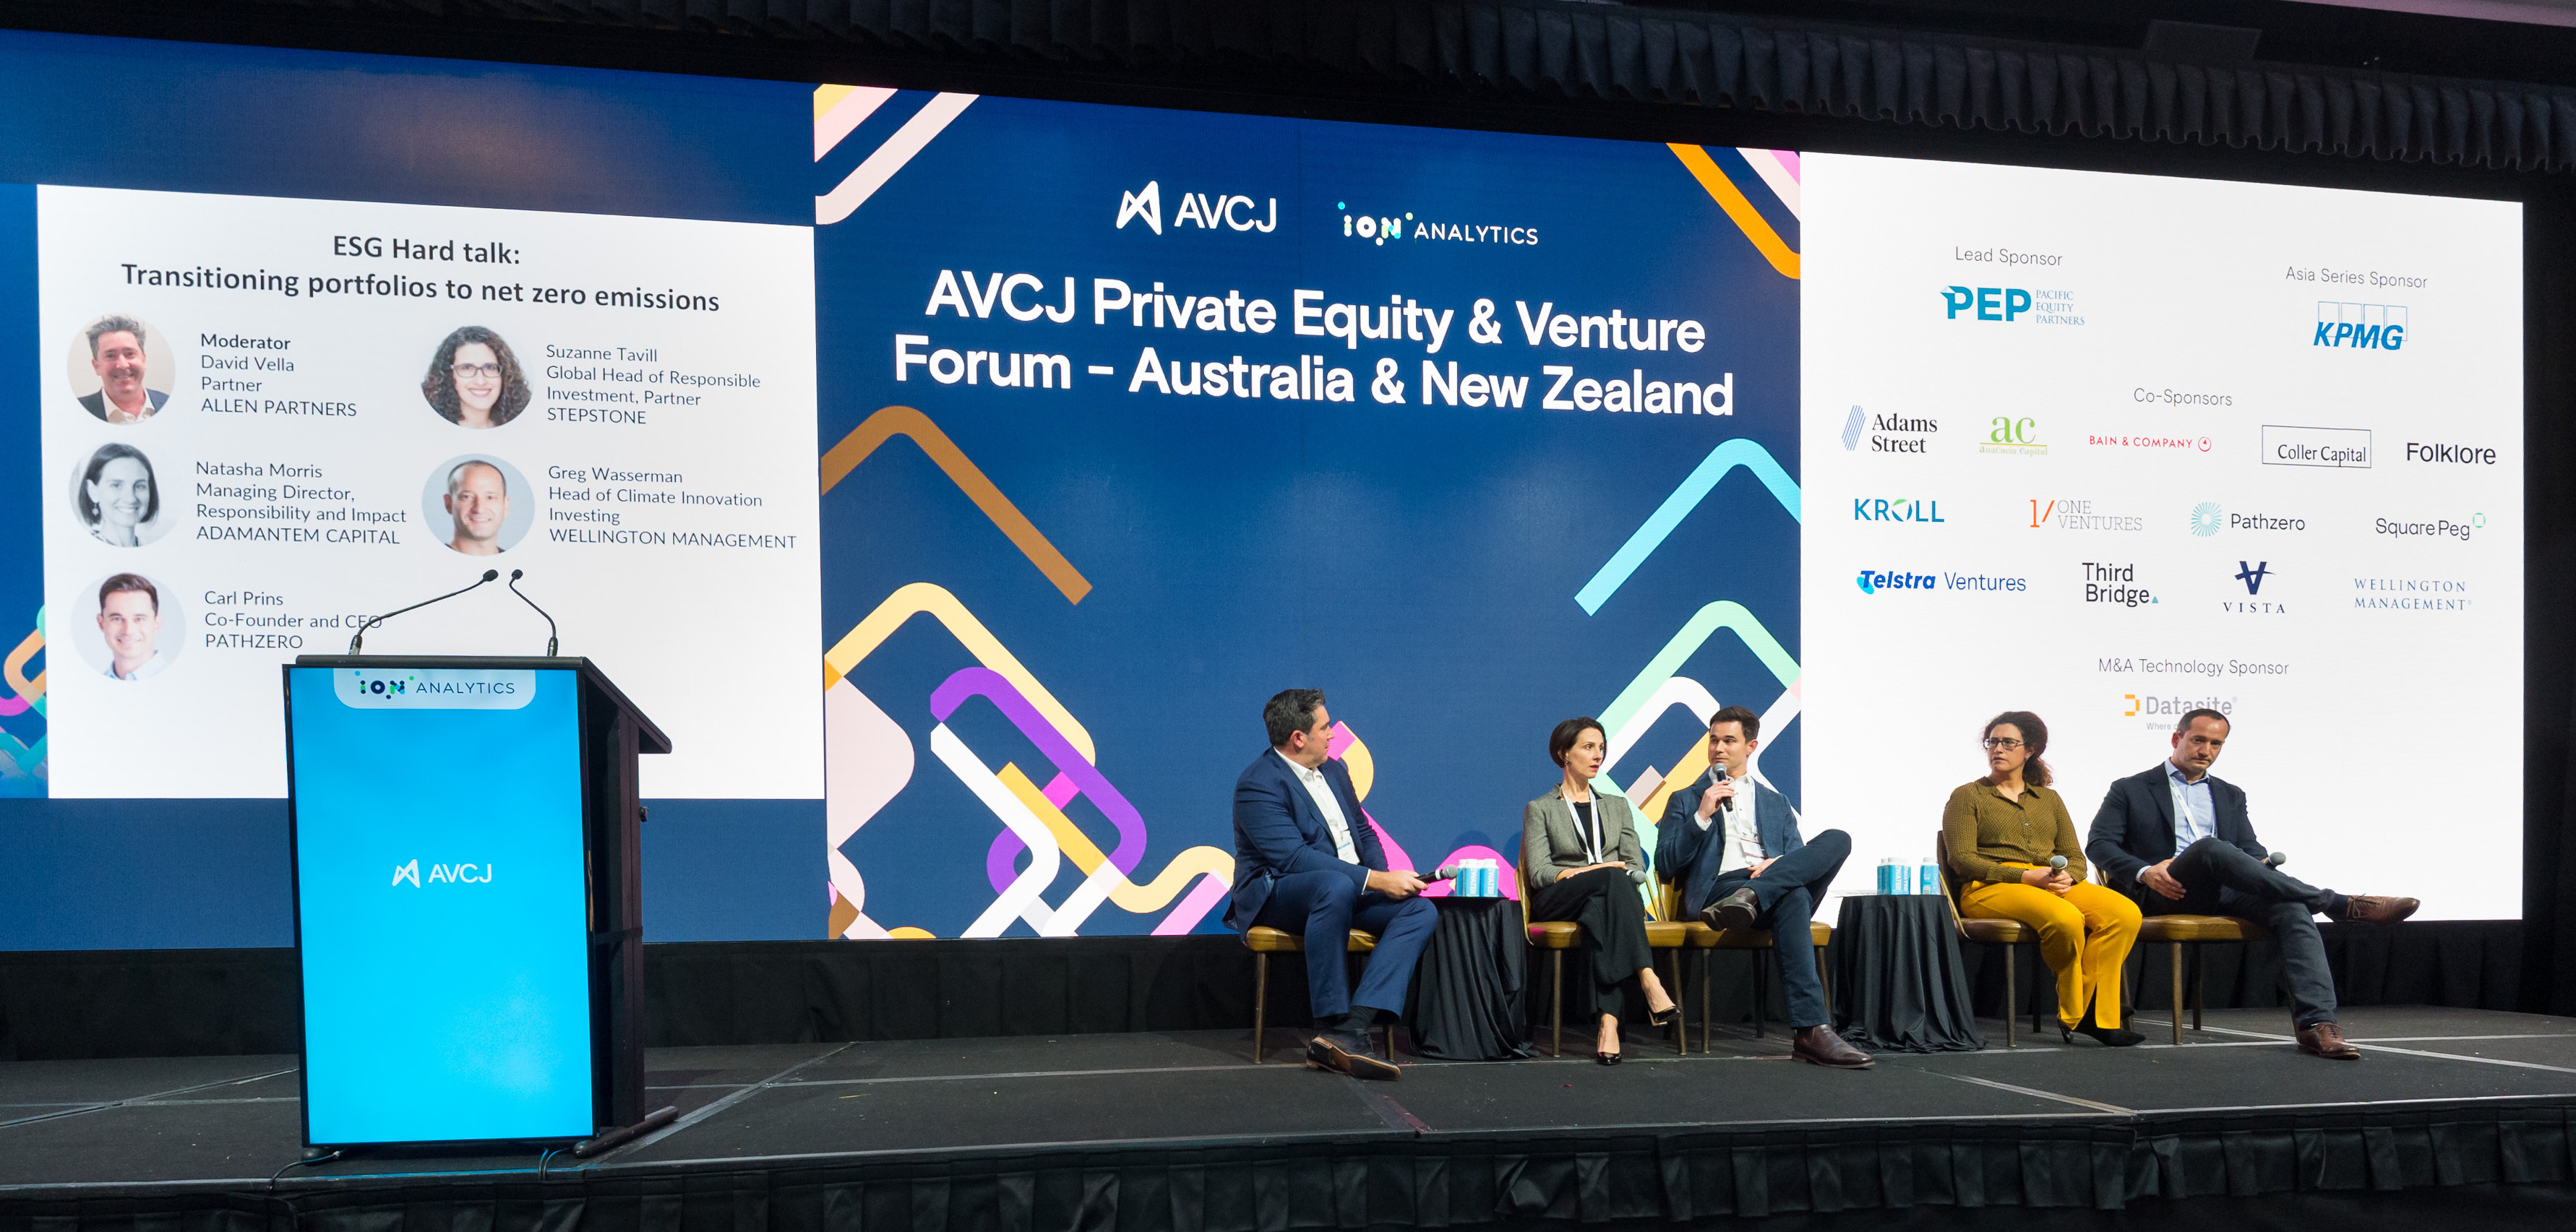 AVCJ Private Equity & Venture Forum in Sydney Makes a Strong Case for Net Zero Portfolios featured image